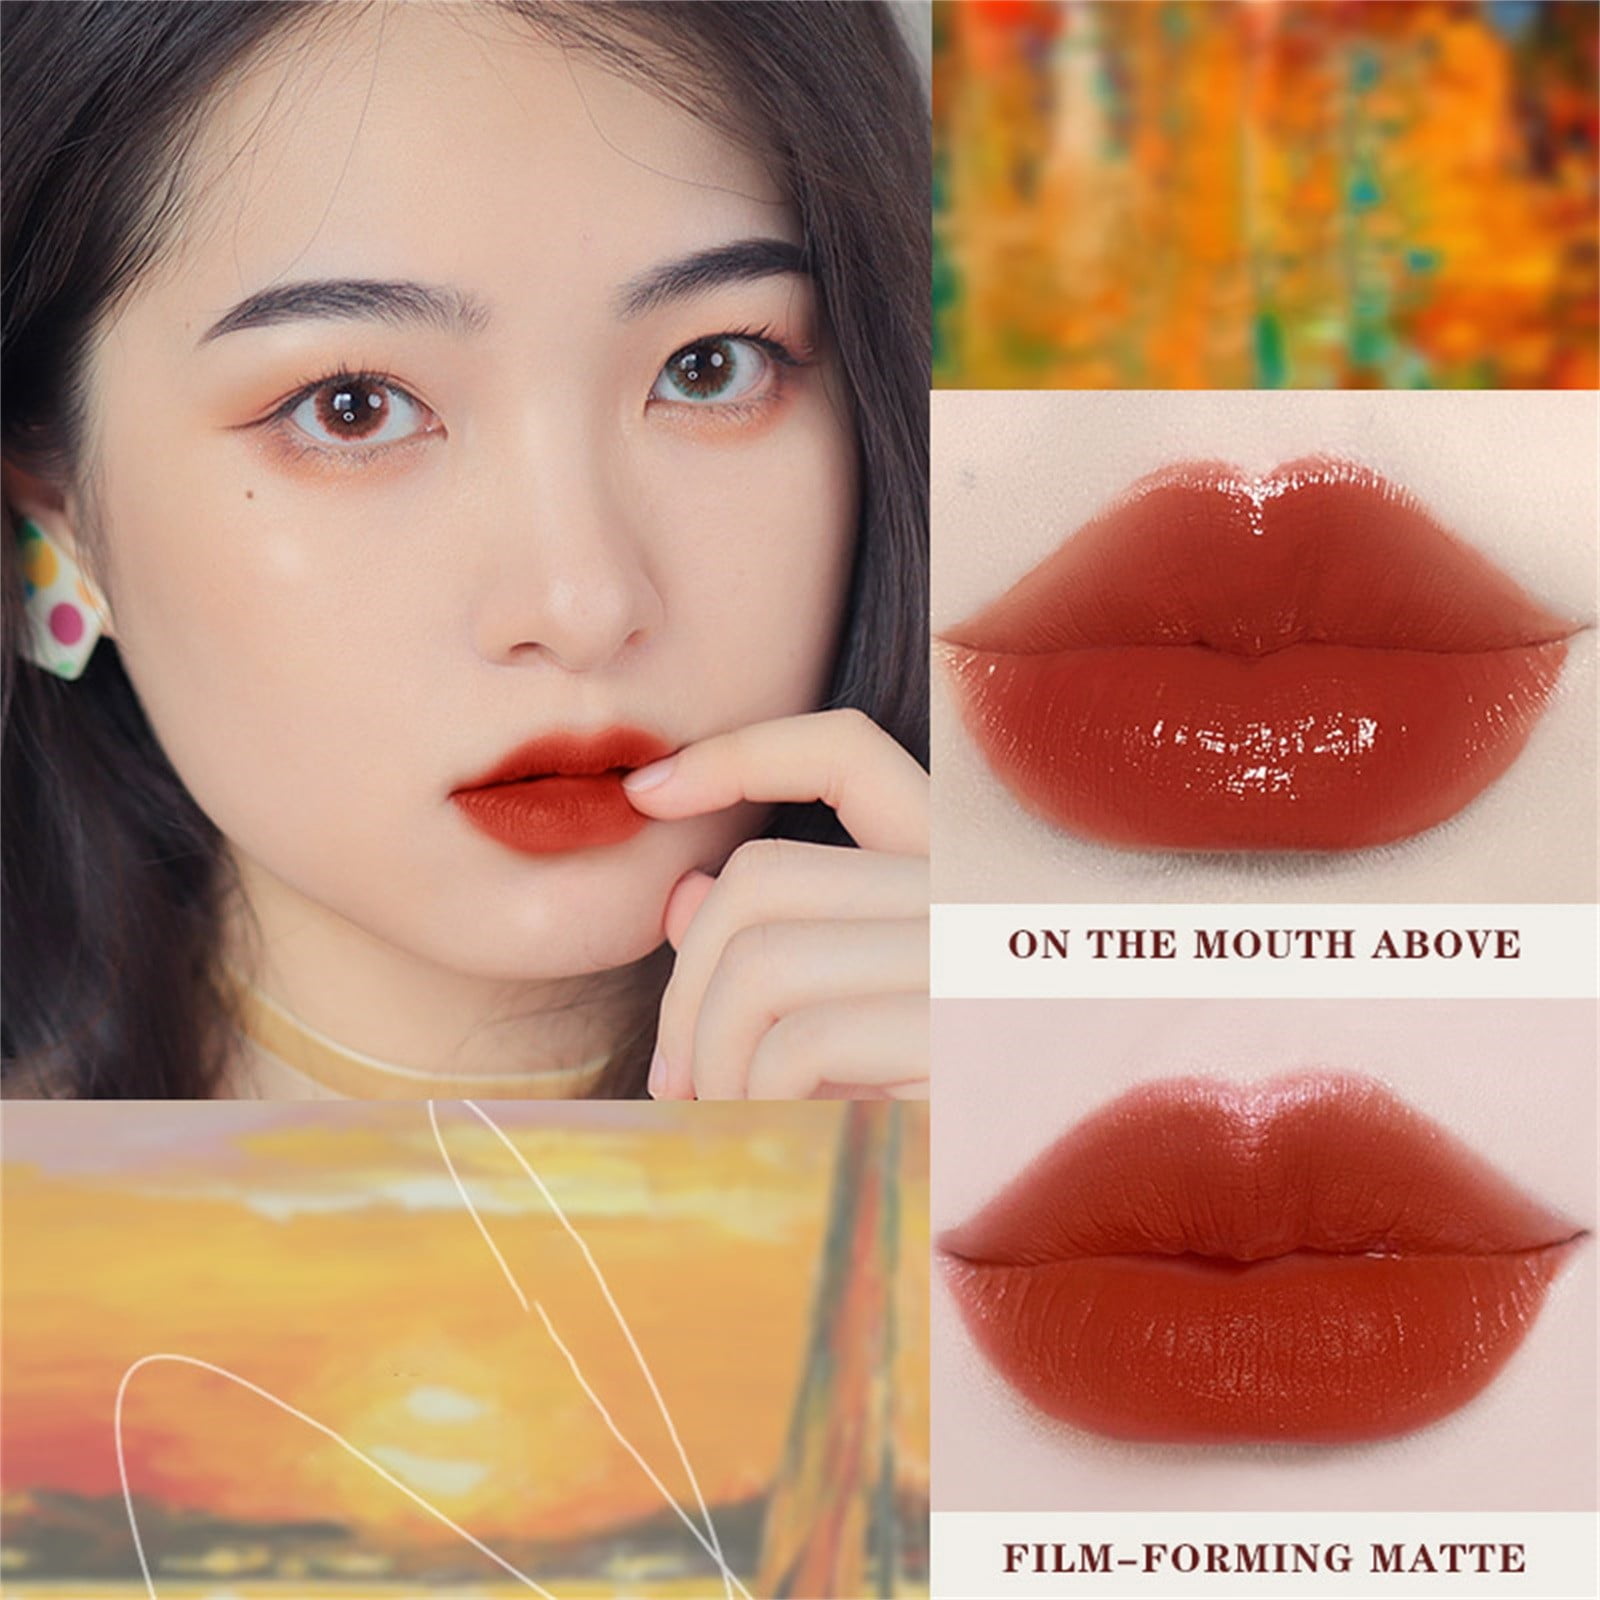 Smudge-Proof Korean Lip Tints to Wear Under Your Mask – THE YESSTYLIST